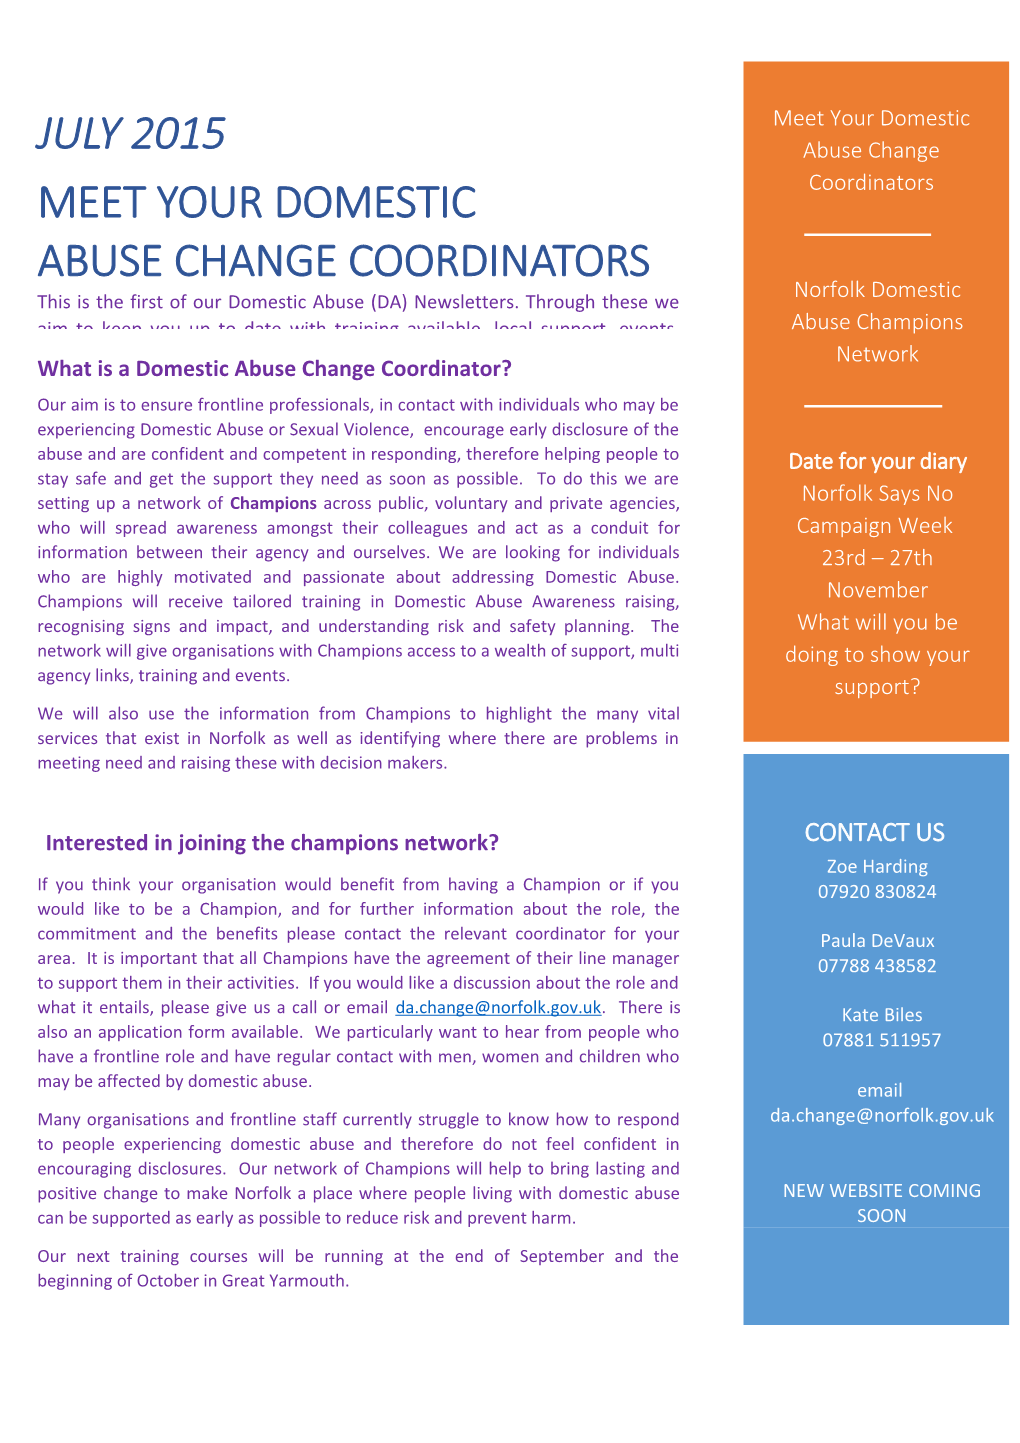 What Is a Domestic Abuse Change Coordinator?